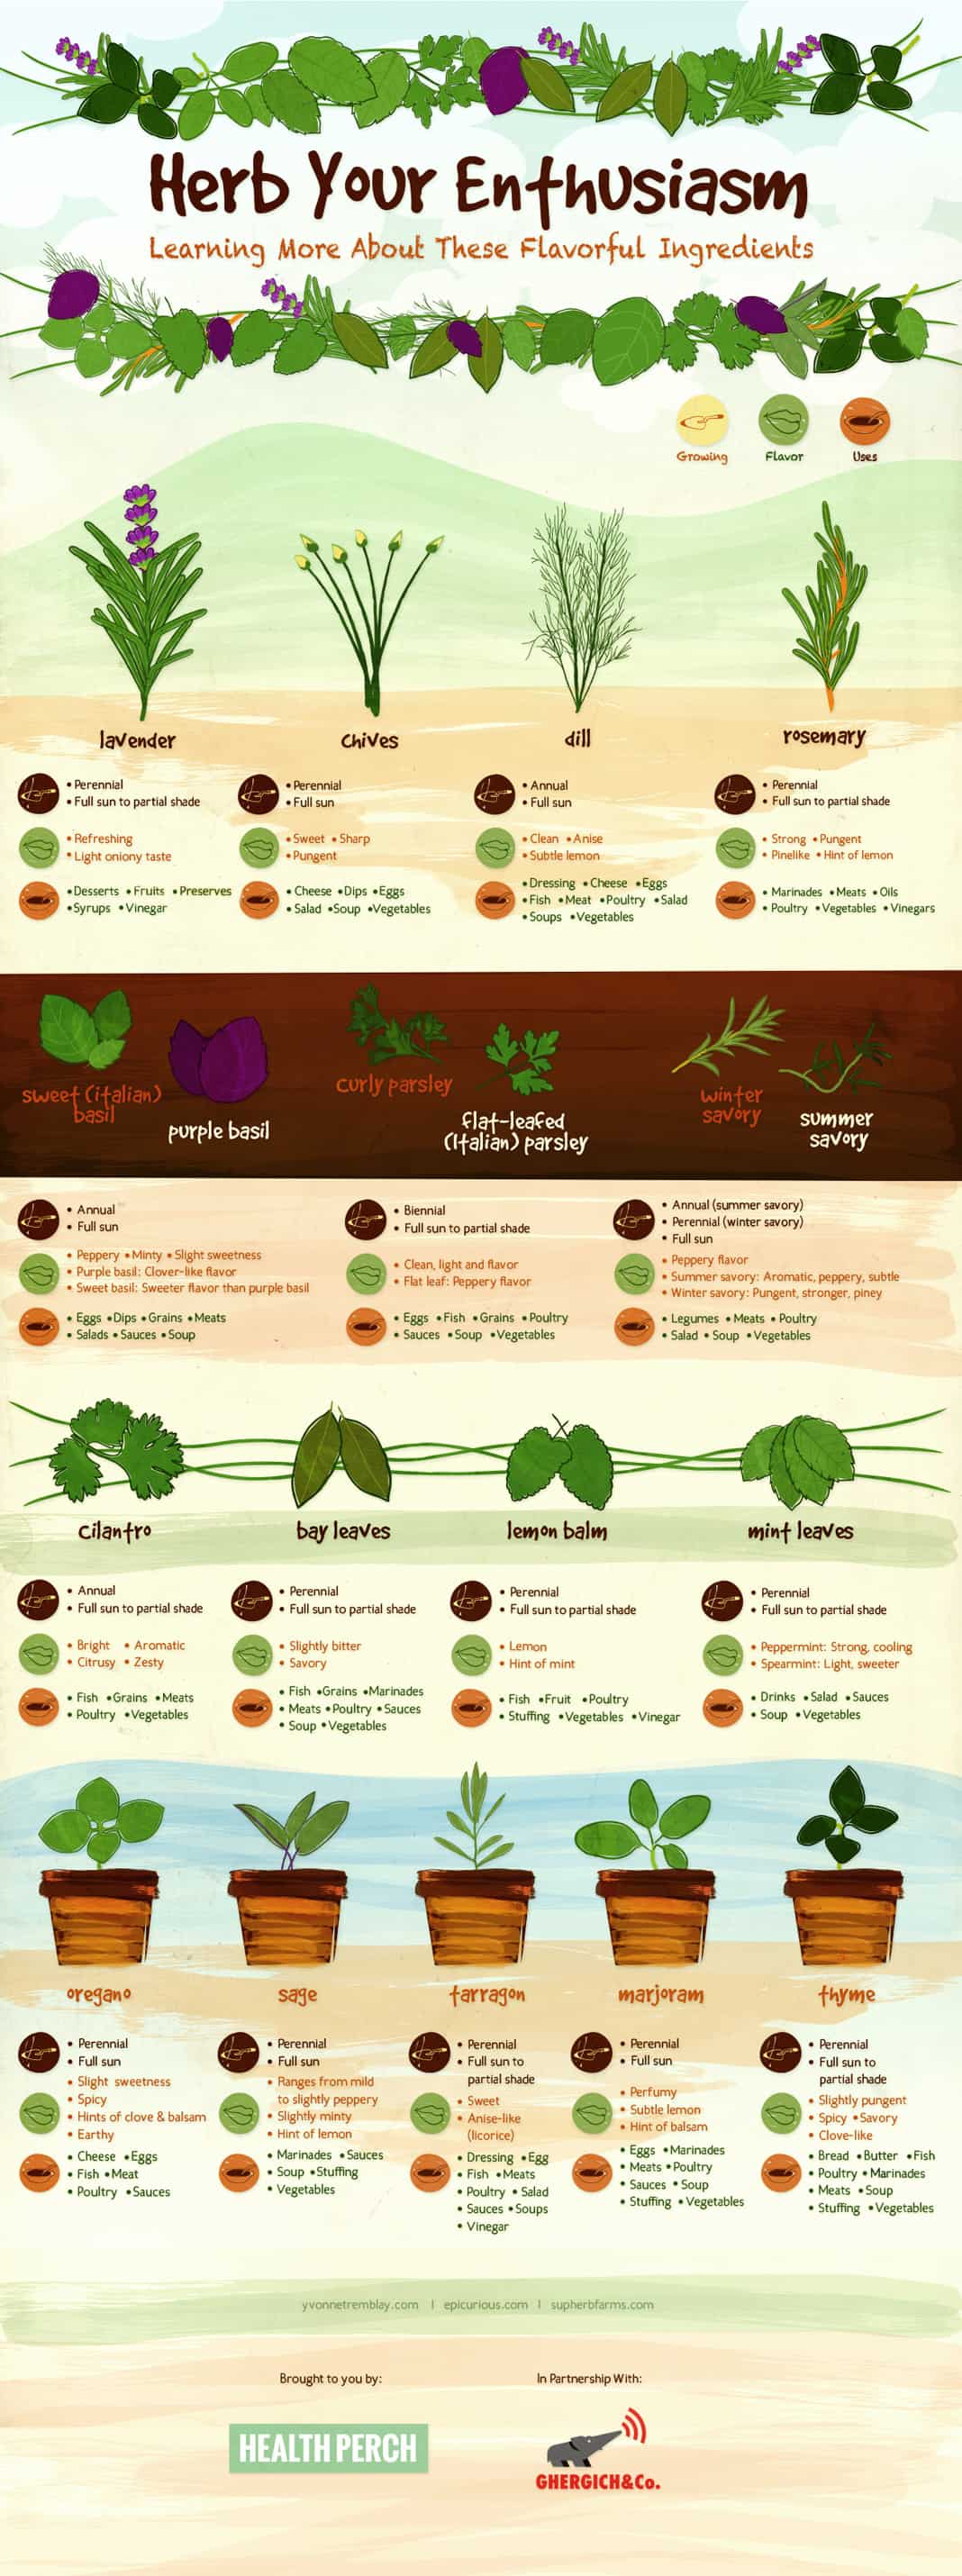 Herb Your Enthusiasm - Culinary Herbs Infographic